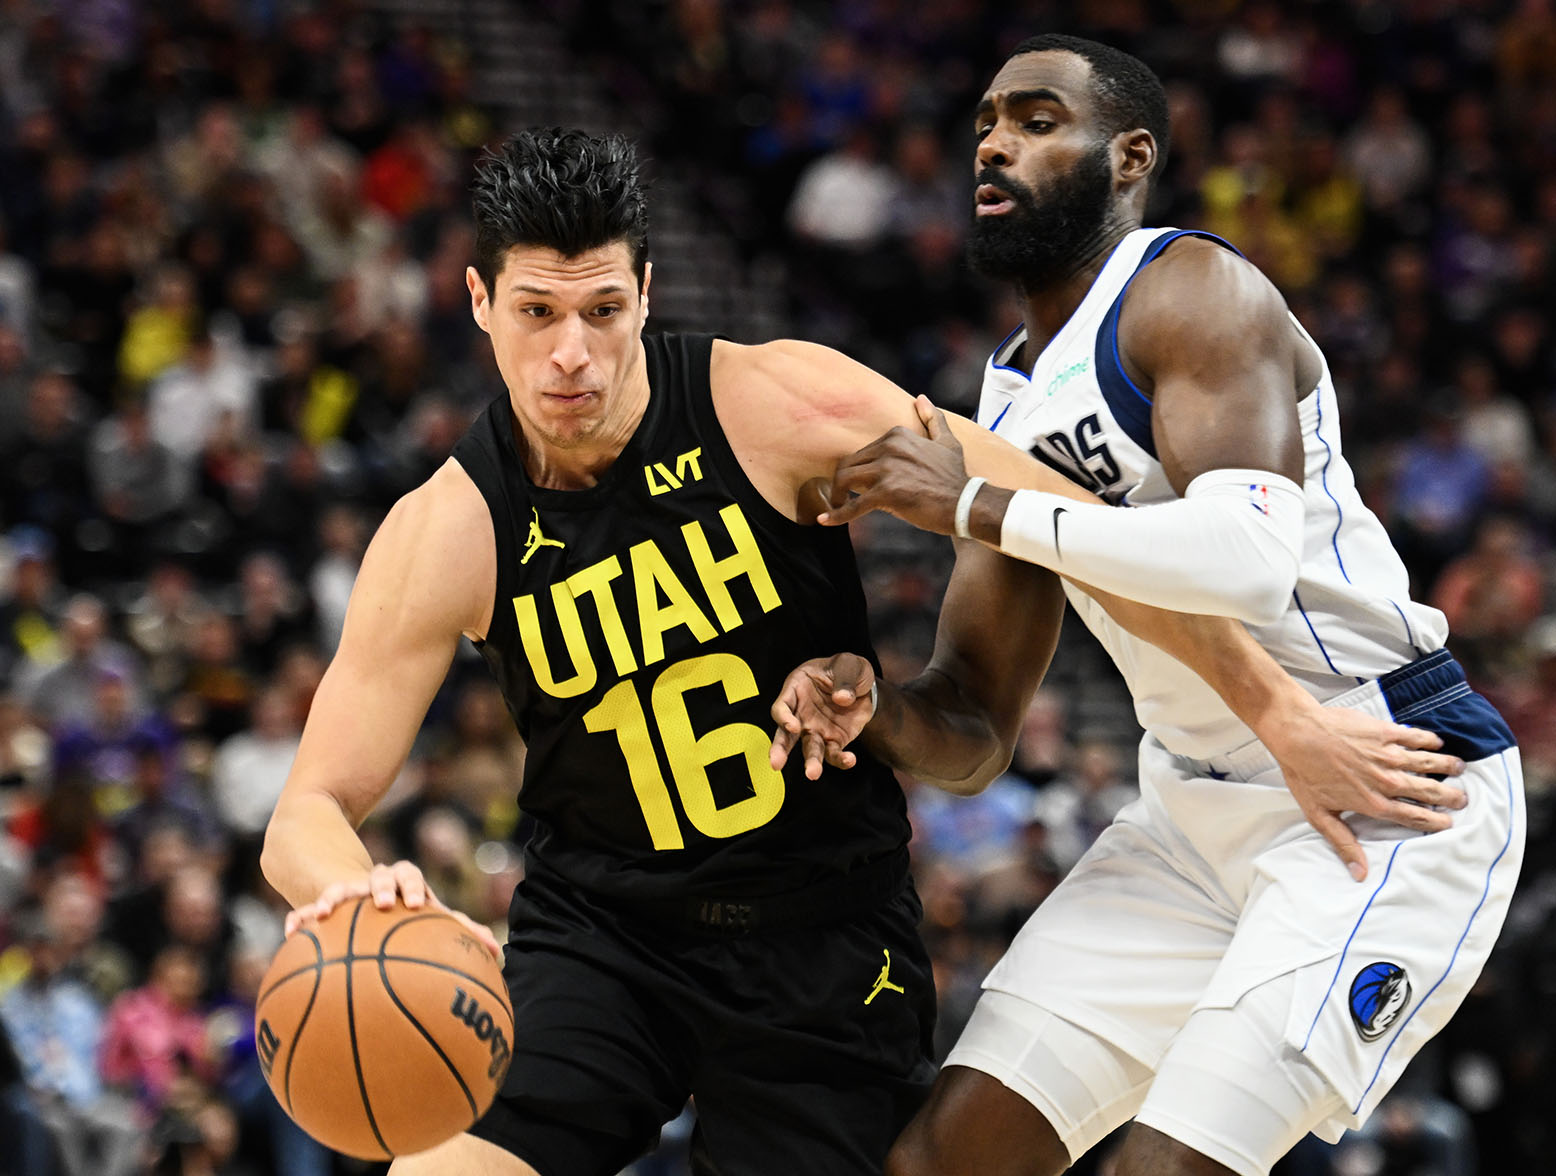 SALT LAKE CITY, UTAH - JANUARY 01: Simone Fontecchio #16 of the Utah Jazz drives past Tim Hardaway Jr. #10 of the Dallas Mavericks during the first half of a game at Delta Center on January 01, 2024 in Salt Lake City, Utah. (Photo by Alex Goodlett/Getty Images)